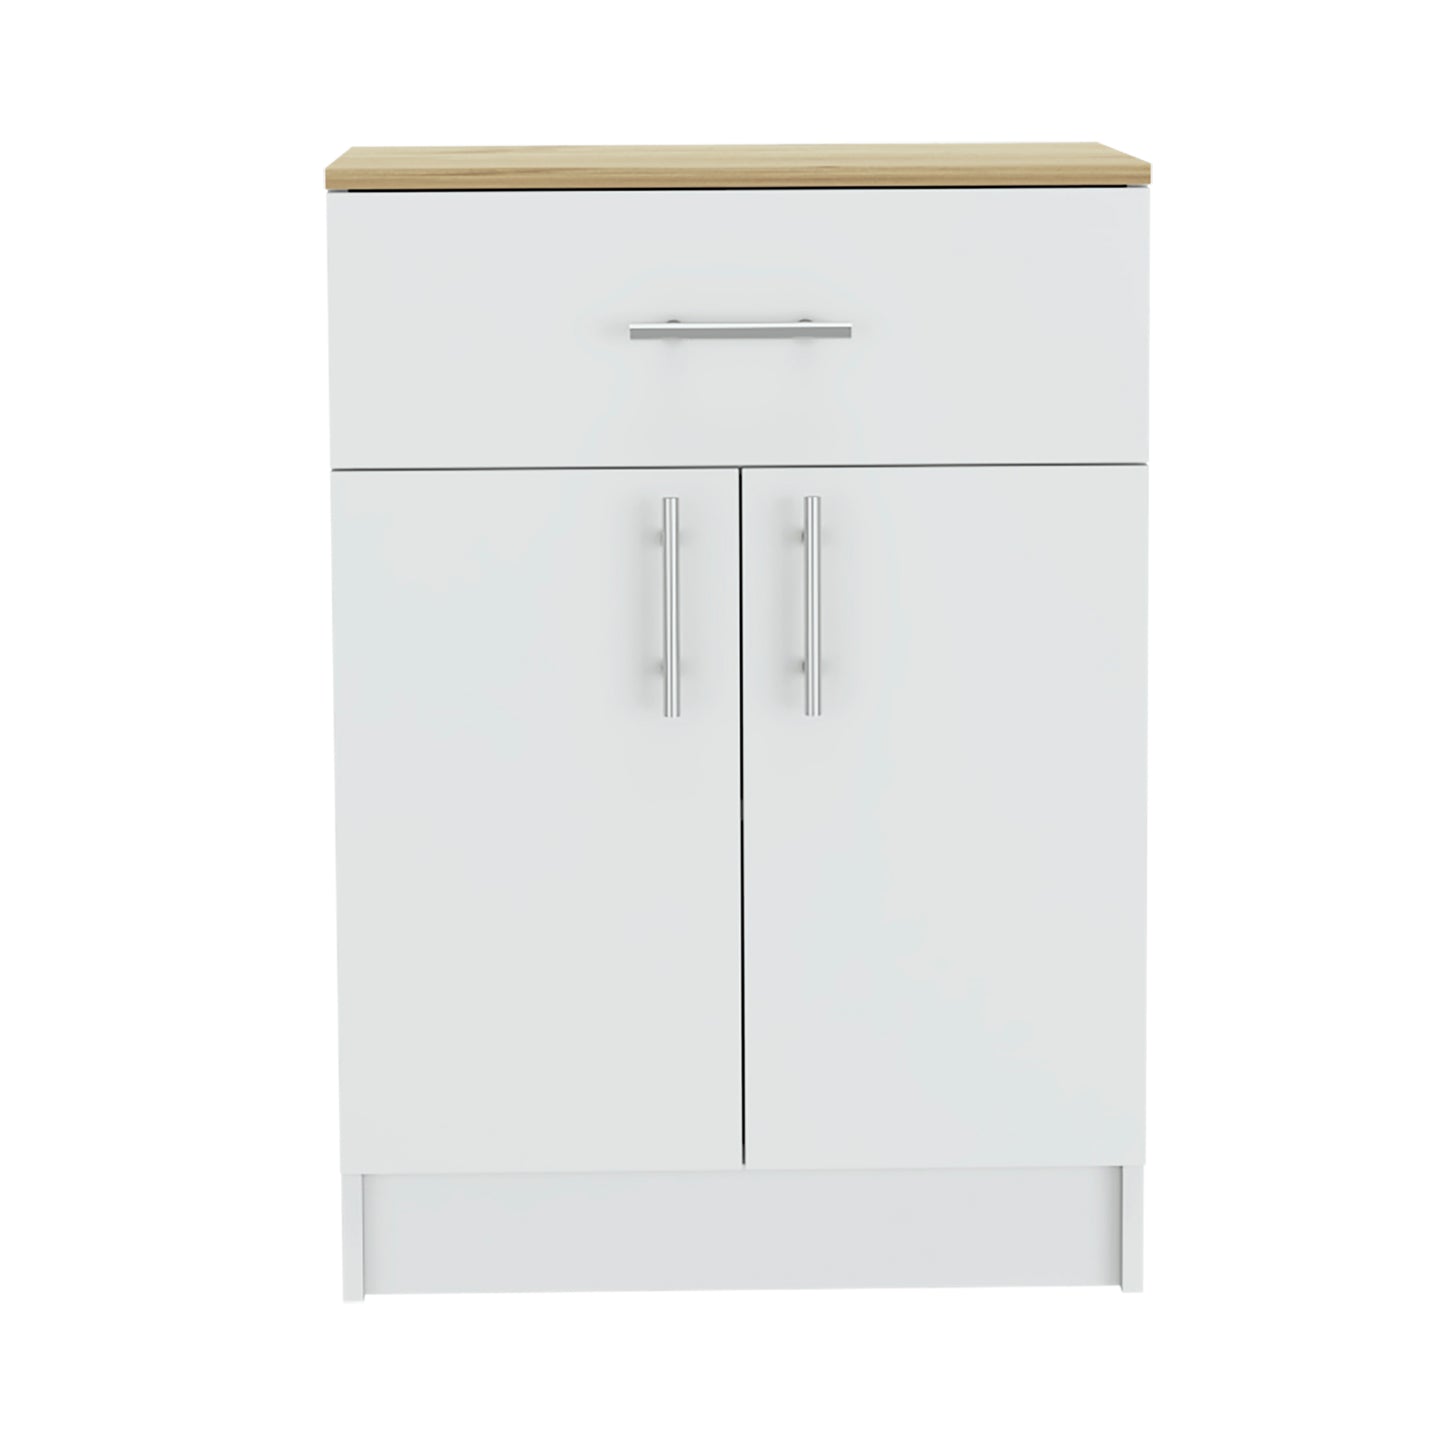 Wilmington 1-Drawer Rectangle Pantry Cabinet - White